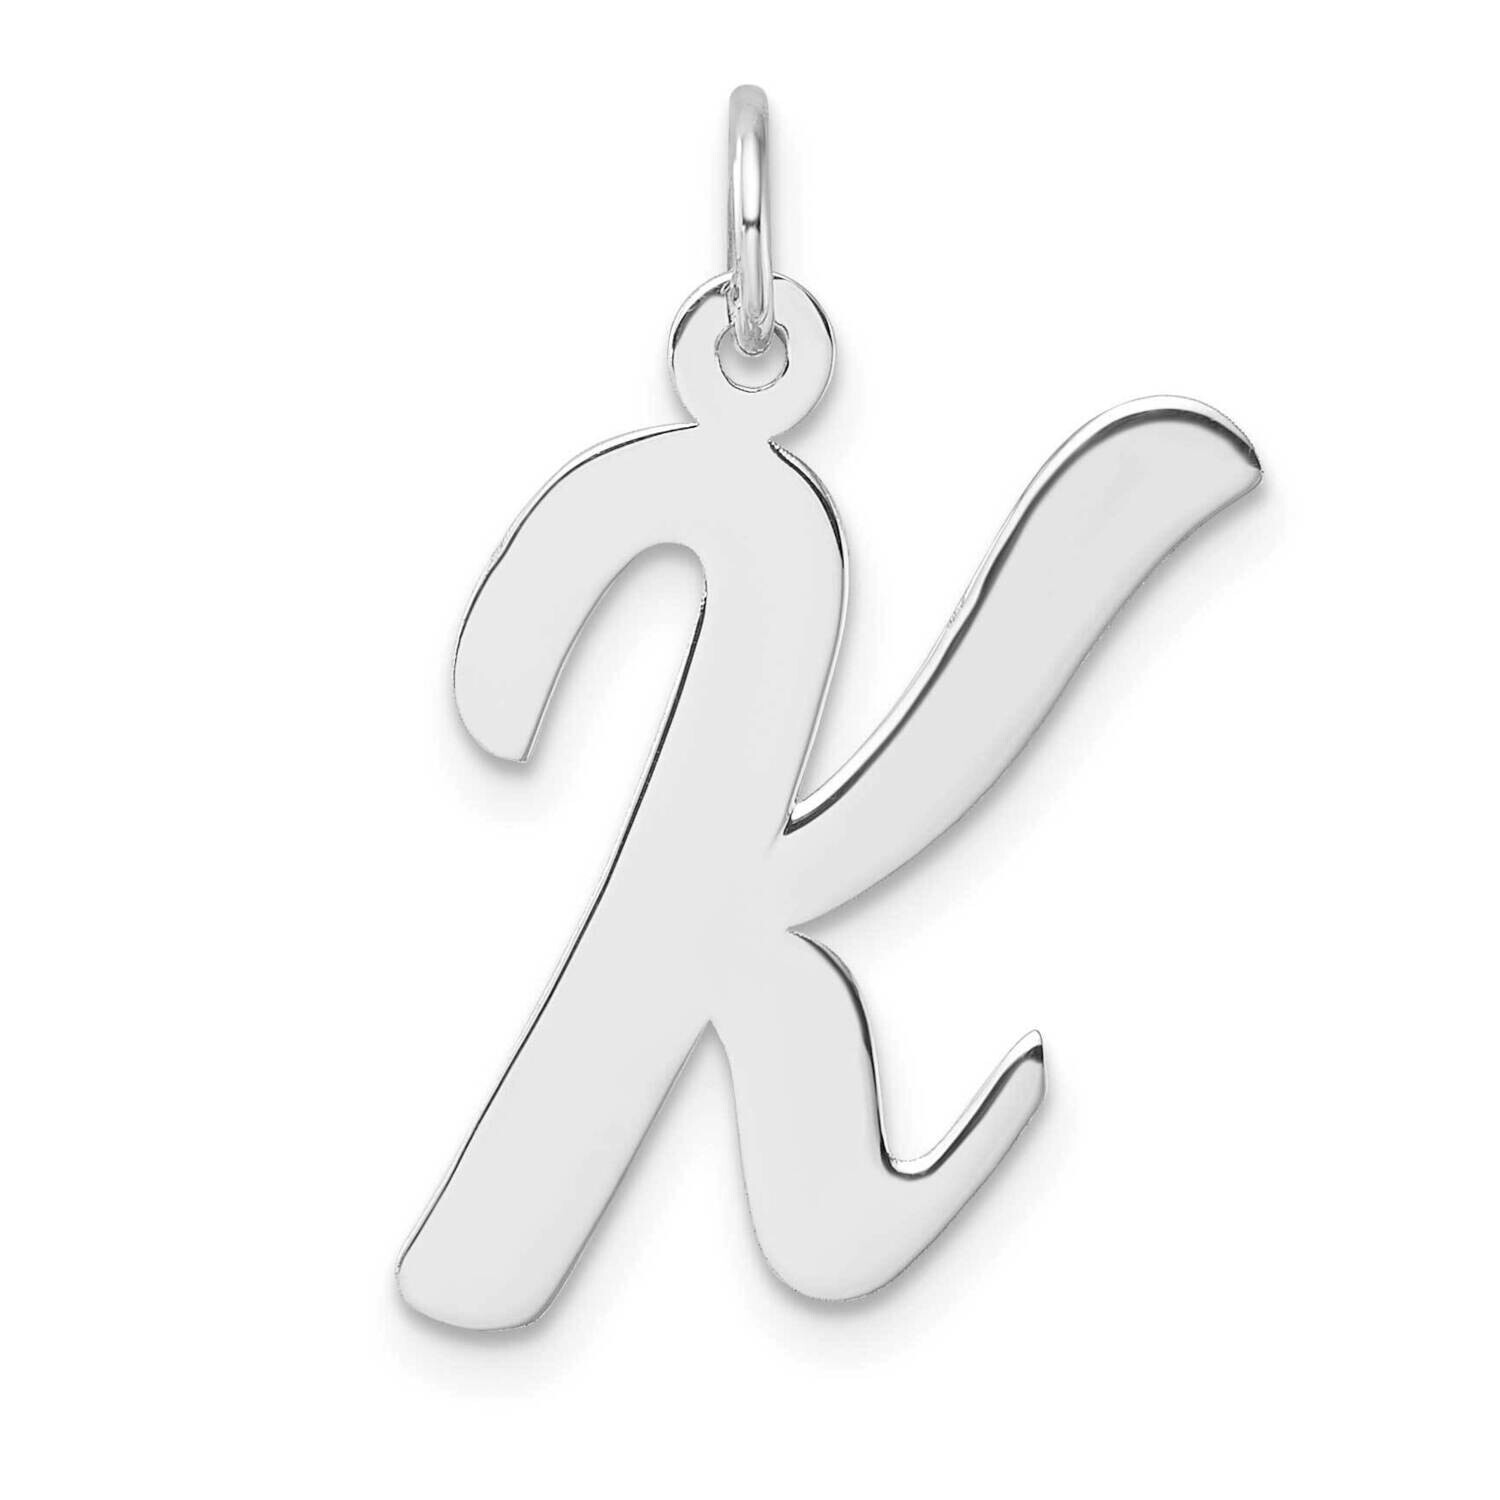 Large Script Letter K Initial Charm Sterling Silver Rhodium-Plated QC11253K